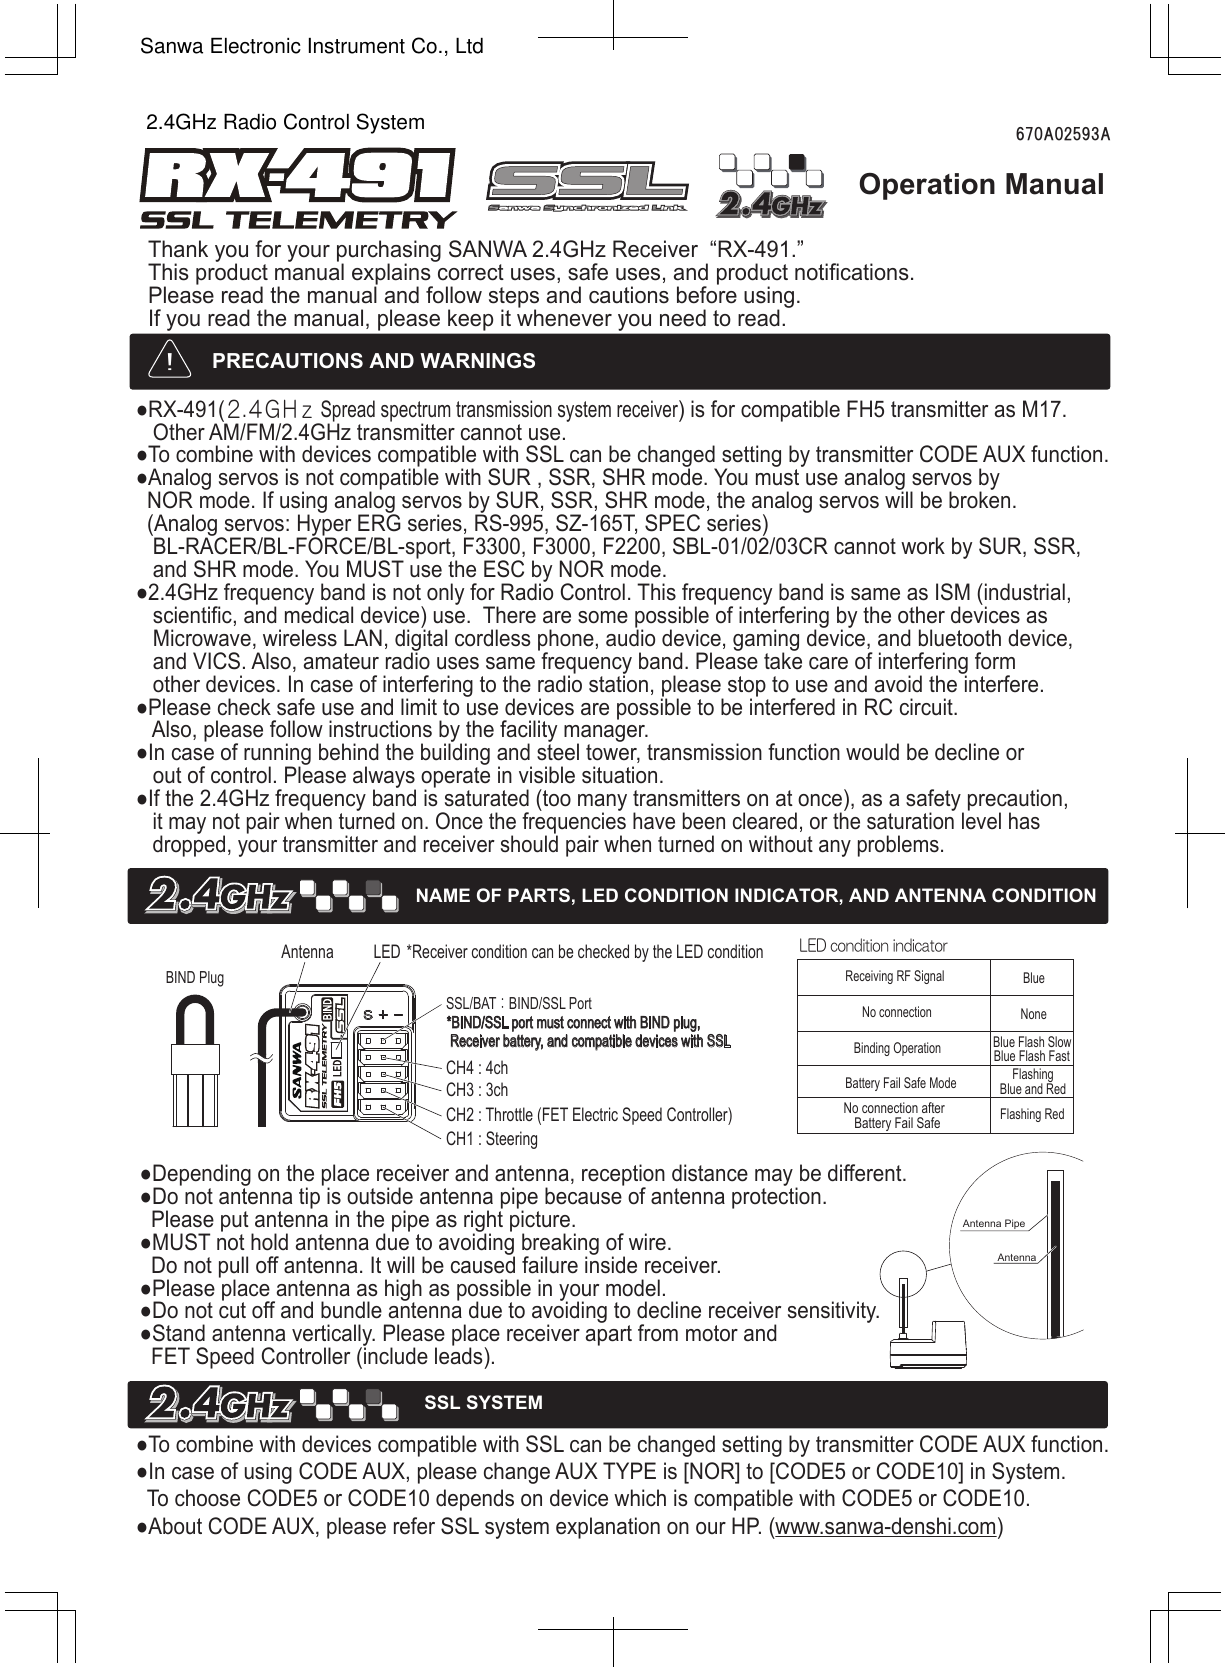 Operation ManualThank you for your purchasing SANWA 2.4GHz Receiver  “RX-491.”This product manual explains correct uses, safe uses, and product notifications.Please read the manual and follow steps and cautions before using.If you read the manual, please keep it whenever you need to read.670A02593A●RX-491(２.４ＧＨｚ Spread spectrum transmission system receiver) is for compatible FH5 transmitter as M17.   Other AM/FM/2.4GHz transmitter cannot use. ●To combine with devices compatible with SSL can be changed setting by transmitter CODE AUX function.   ●Analog servos is not compatible with SUR , SSR, SHR mode. You must use analog servos by   NOR mode. If using analog servos by SUR, SSR, SHR mode, the analog servos will be broken.   (Analog servos: Hyper ERG series, RS-995, SZ-165T, SPEC series)    BL-RACER/BL-FORCE/BL-sport, F3300, F3000, F2200, SBL-01/02/03CR cannot work by SUR, SSR,    and SHR mode. You MUST use the ESC by NOR mode. ●2.4GHz frequency band is not only for Radio Control. This frequency band is same as ISM (industrial,    scientific, and medical device) use.  There are some possible of interfering by the other devices as    Microwave, wireless LAN, digital cordless phone, audio device, gaming device, and bluetooth device,    and VICS. Also, amateur radio uses same frequency band. Please take care of interfering form   other devices. In case of interfering to the radio station, please stop to use and avoid the interfere.●Please check safe use and limit to use devices are possible to be interfered in RC circuit.    Also, please follow instructions by the facility manager.●In case of running behind the building and steel tower, transmission function would be decline or   out of control. Please always operate in visible situation. ●If the 2.4GHz frequency band is saturated (too many transmitters on at once), as a safety precaution,    it may not pair when turned on. Once the frequencies have been cleared, or the saturation level has    dropped, your transmitter and receiver should pair when turned on without any problems. !*Receiver condition can be checked by the LED condition●To combine with devices compatible with SSL can be changed setting by transmitter CODE AUX function.●In case of using CODE AUX, please change AUX TYPE is [NOR] to [CODE5 or CODE10] in System.  To choose CODE5 or CODE10 depends on device which is compatible with CODE5 or CODE10. ●About CODE AUX, please refer SSL system explanation on our HP. (www.sanwa-denshi.com)●Depending on the place receiver and antenna, reception distance may be different.●Do not antenna tip is outside antenna pipe because of antenna protection.   Please put antenna in the pipe as right picture.●MUST not hold antenna due to avoiding breaking of wire.   Do not pull off antenna. It will be caused failure inside receiver. ●Please place antenna as high as possible in your model.●Do not cut off and bundle antenna due to avoiding to decline receiver sensitivity.●Stand antenna vertically. Please place receiver apart from motor and   FET Speed Controller (include leads).  LED condition indicatorReceiving RF Signal BlueBinding OperationNo connectionBattery Fail Safe ModeFlashing RedNo connection afterBattery Fail SafeCH4 : 4chSSL/BAT：BIND/SSL Port*BIND/SSL port must connect with BIND plug, Receiver battery, and compatible devices with SSLCH3 : 3chCH2 : Throttle (FET Electric Speed Controller)CH1 : SteeringBIND PlugLEDAntennaNAME OF PARTS, LED CONDITION INDICATOR, AND ANTENNA CONDITIONPRECAUTIONS AND WARNINGSNoneBlue Flash SlowBlue Flash FastFlashingBlue and RedAntenna PipeAntennaSSL SYSTEM2.4GHz Radio Control SystemSanwa Electronic Instrument Co., Ltd